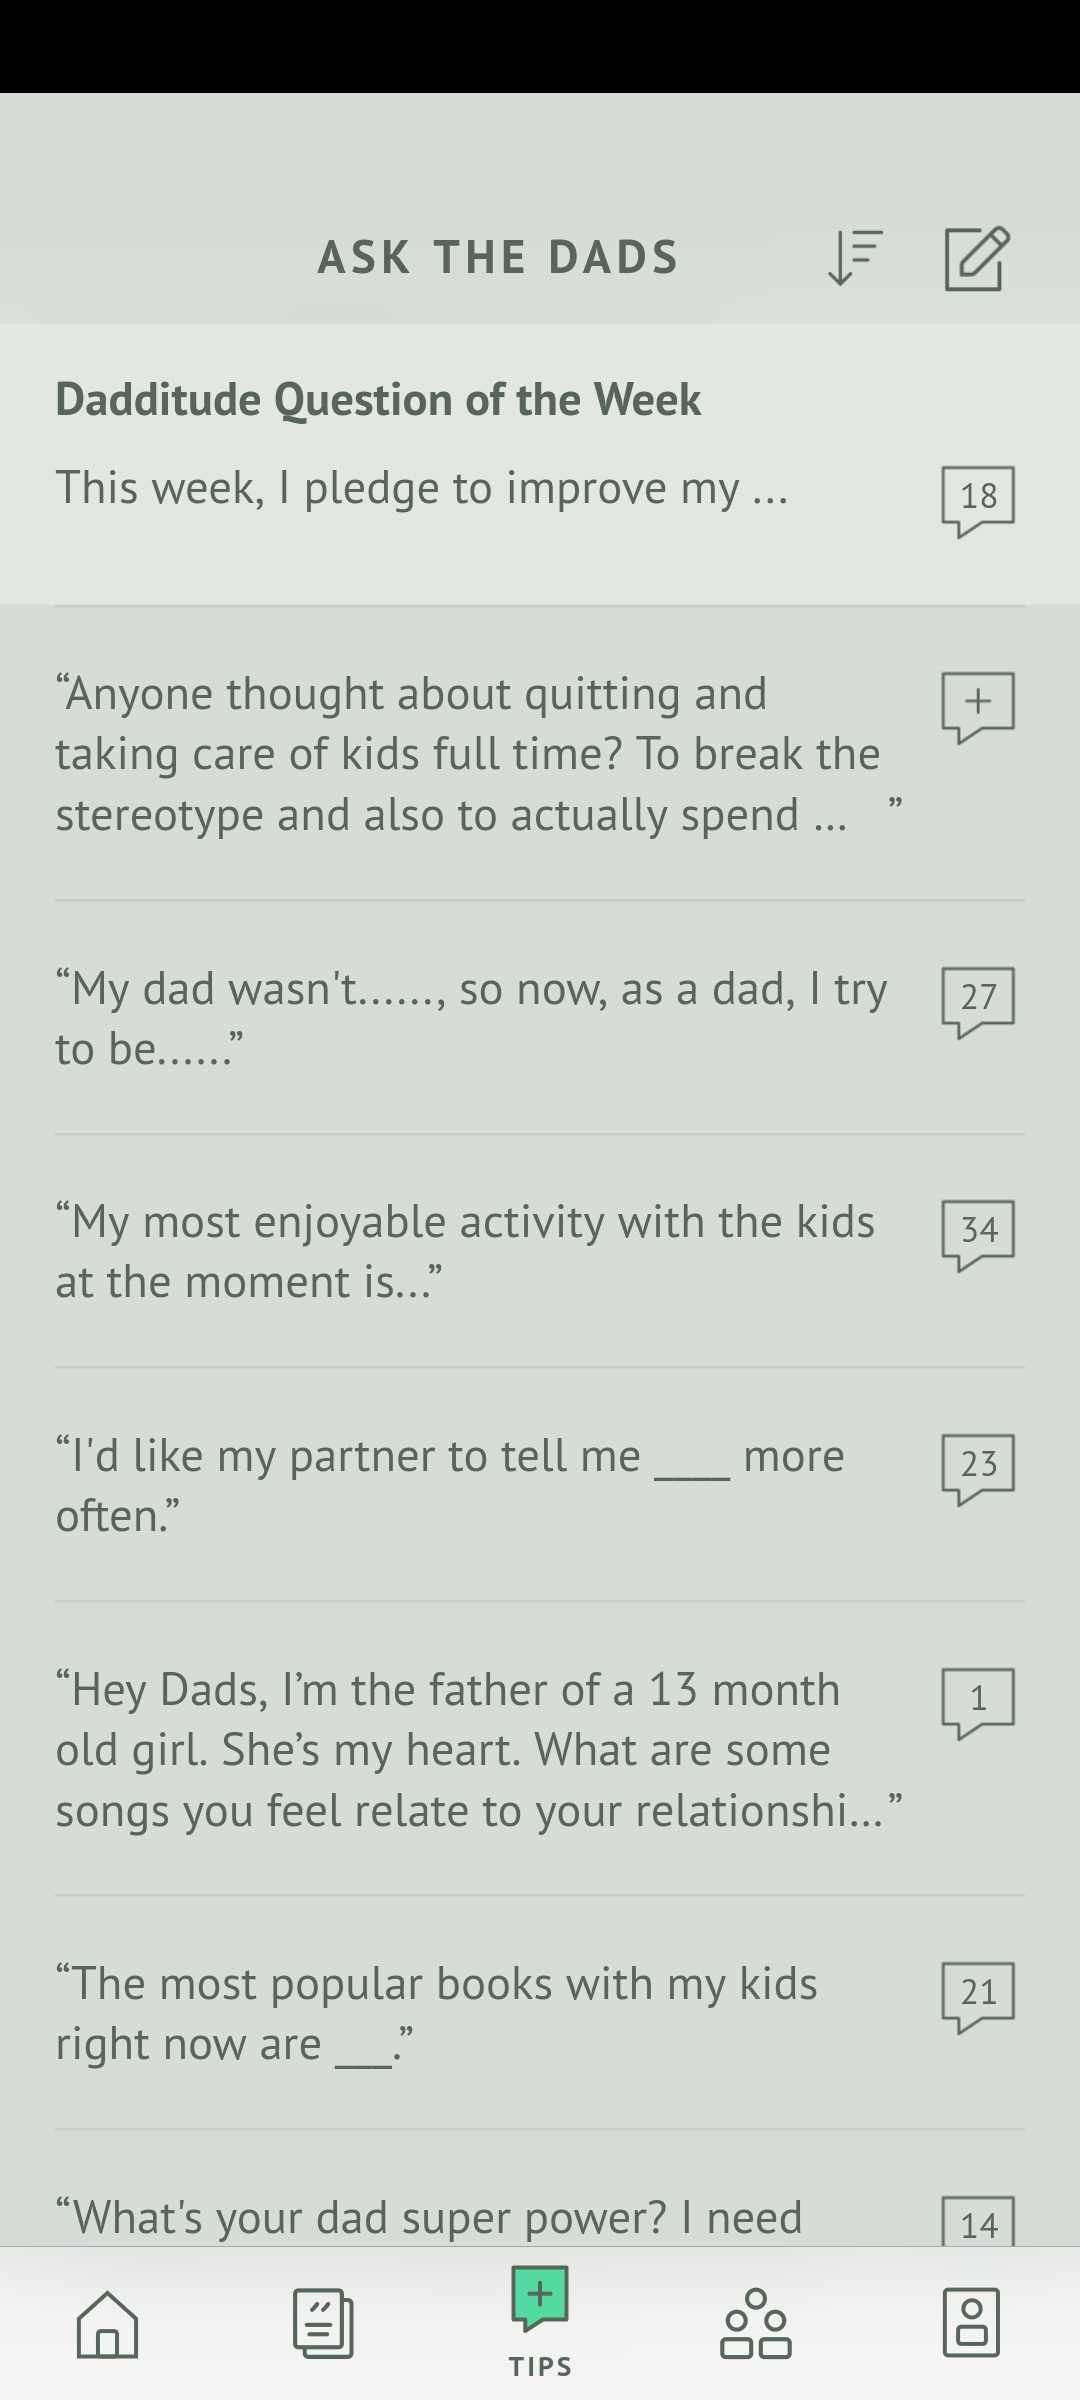 The Ask The Dads community in Dadditude is a good place to get a quick response to any question you might have